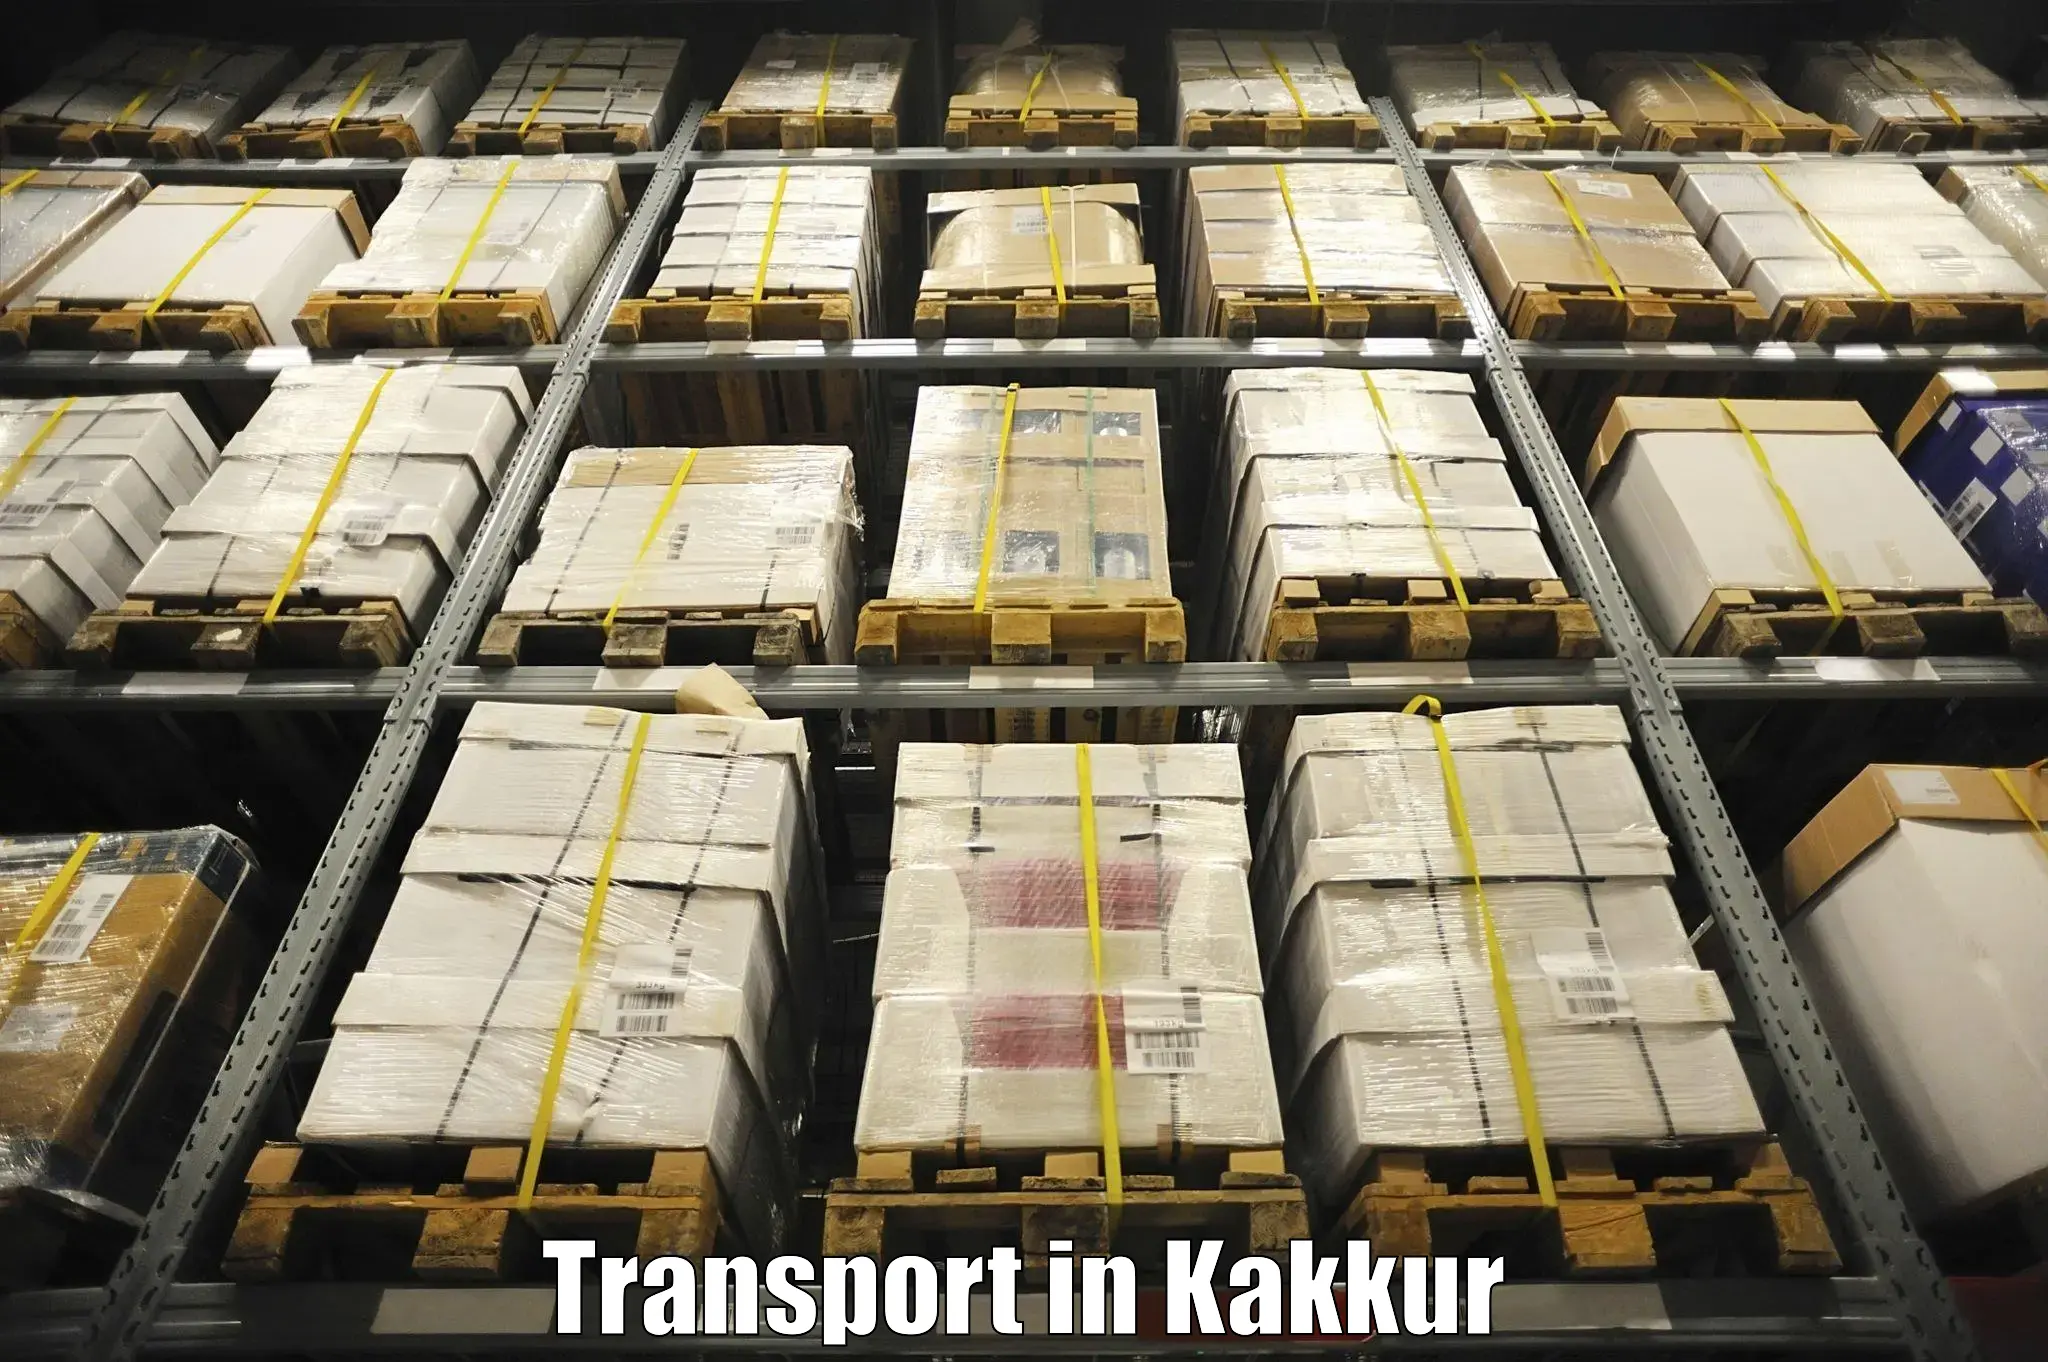 Container transportation services in Kakkur